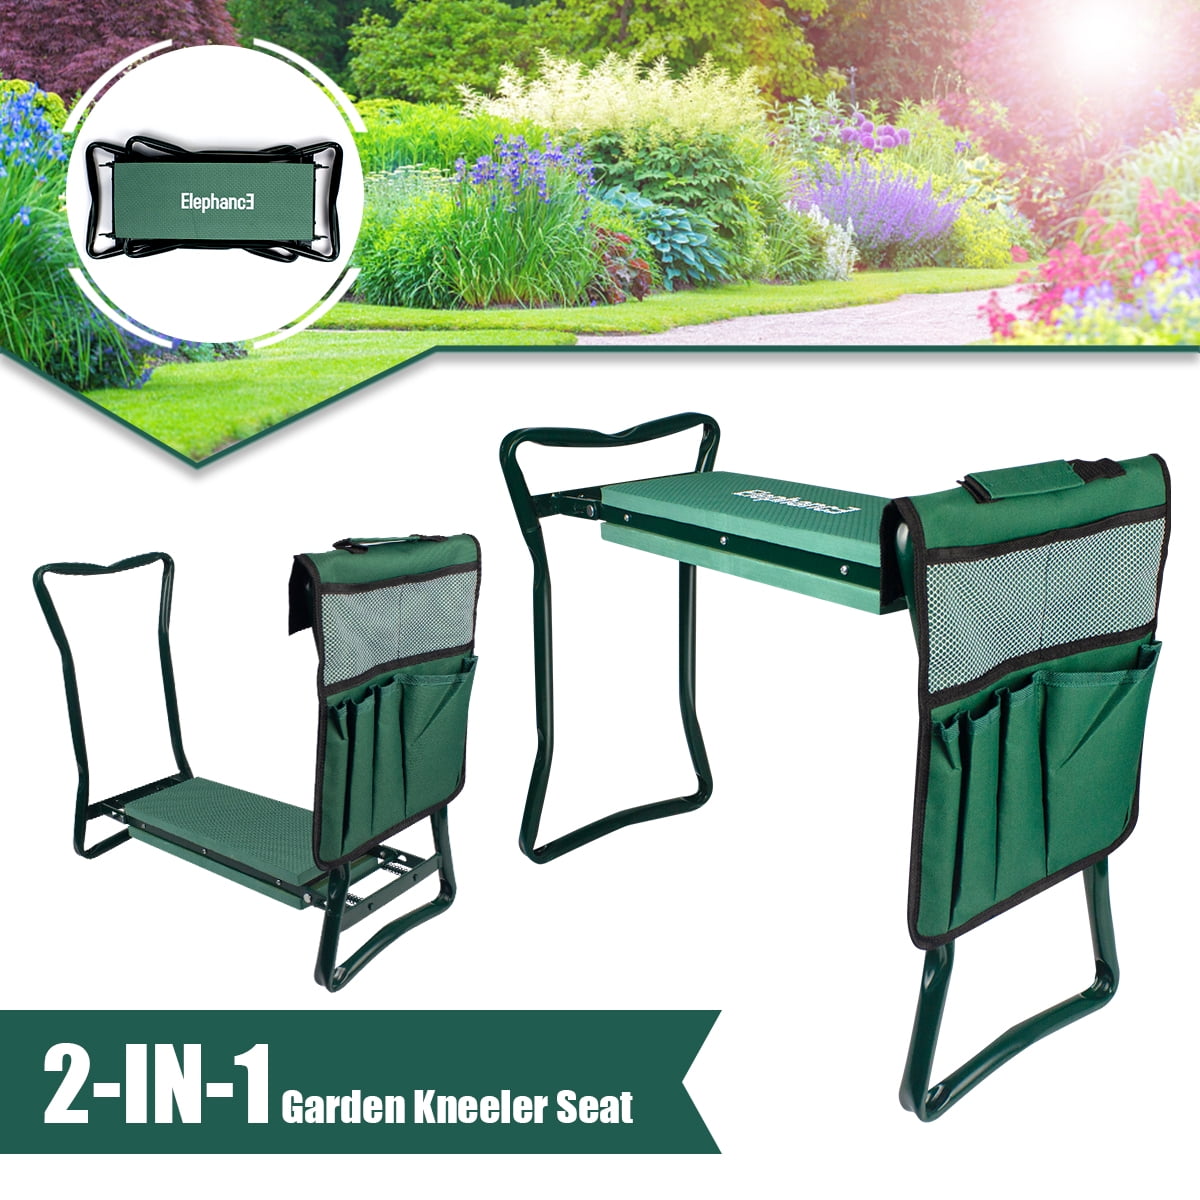 Beatuy Garde Kneeler Seat With Kneeling Pad And Large Tool Pouch Foldable Stool 